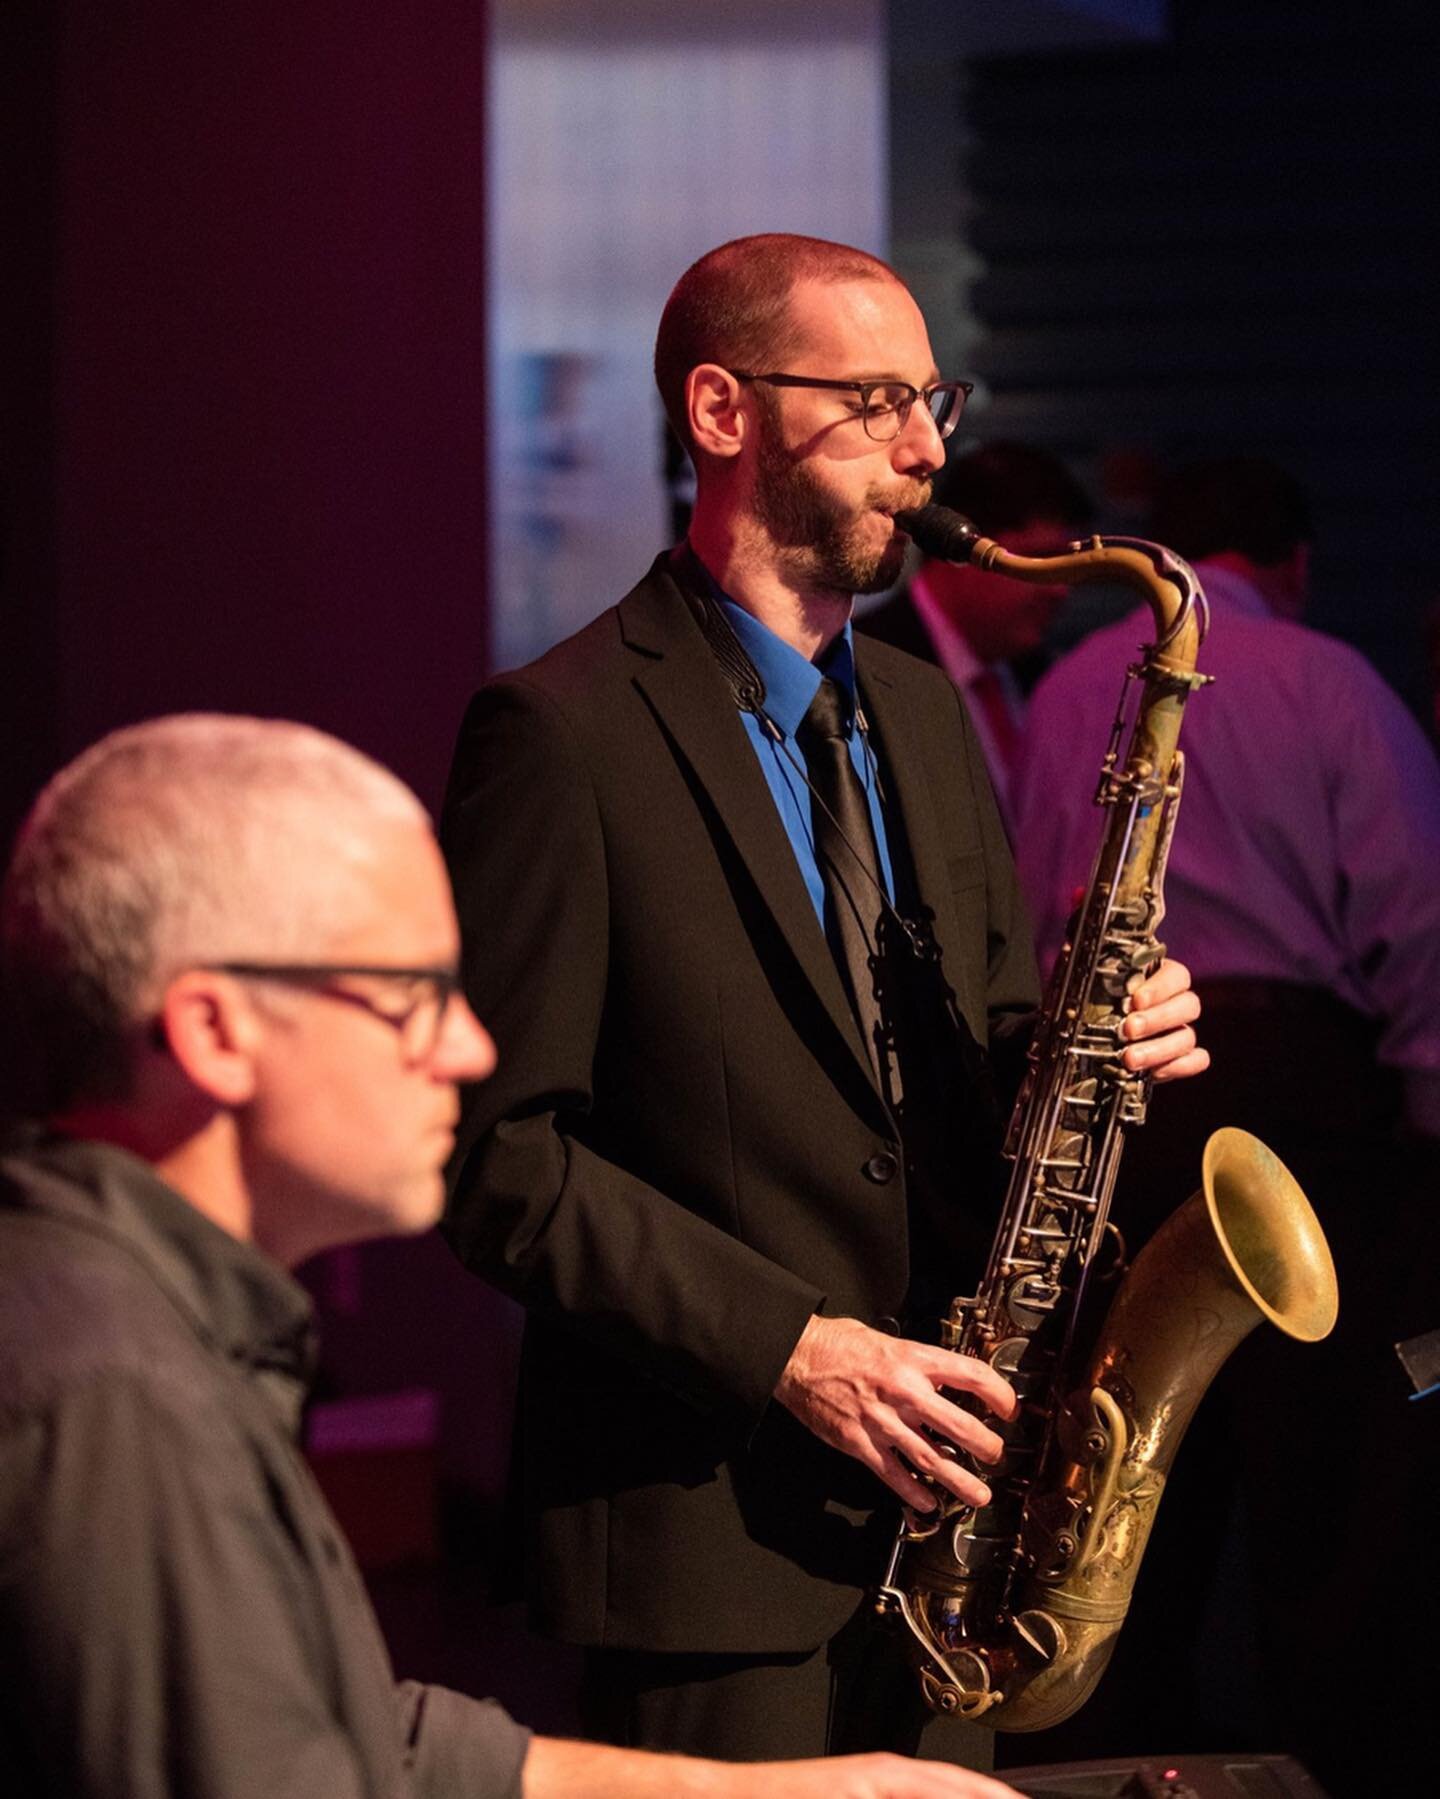 Duo with @rustyjazz a few weeks ago at @wgbh for @allstonbrightoncdc All Bright Night 2019 🎷🎹
-
📷: @rachelliottphotography